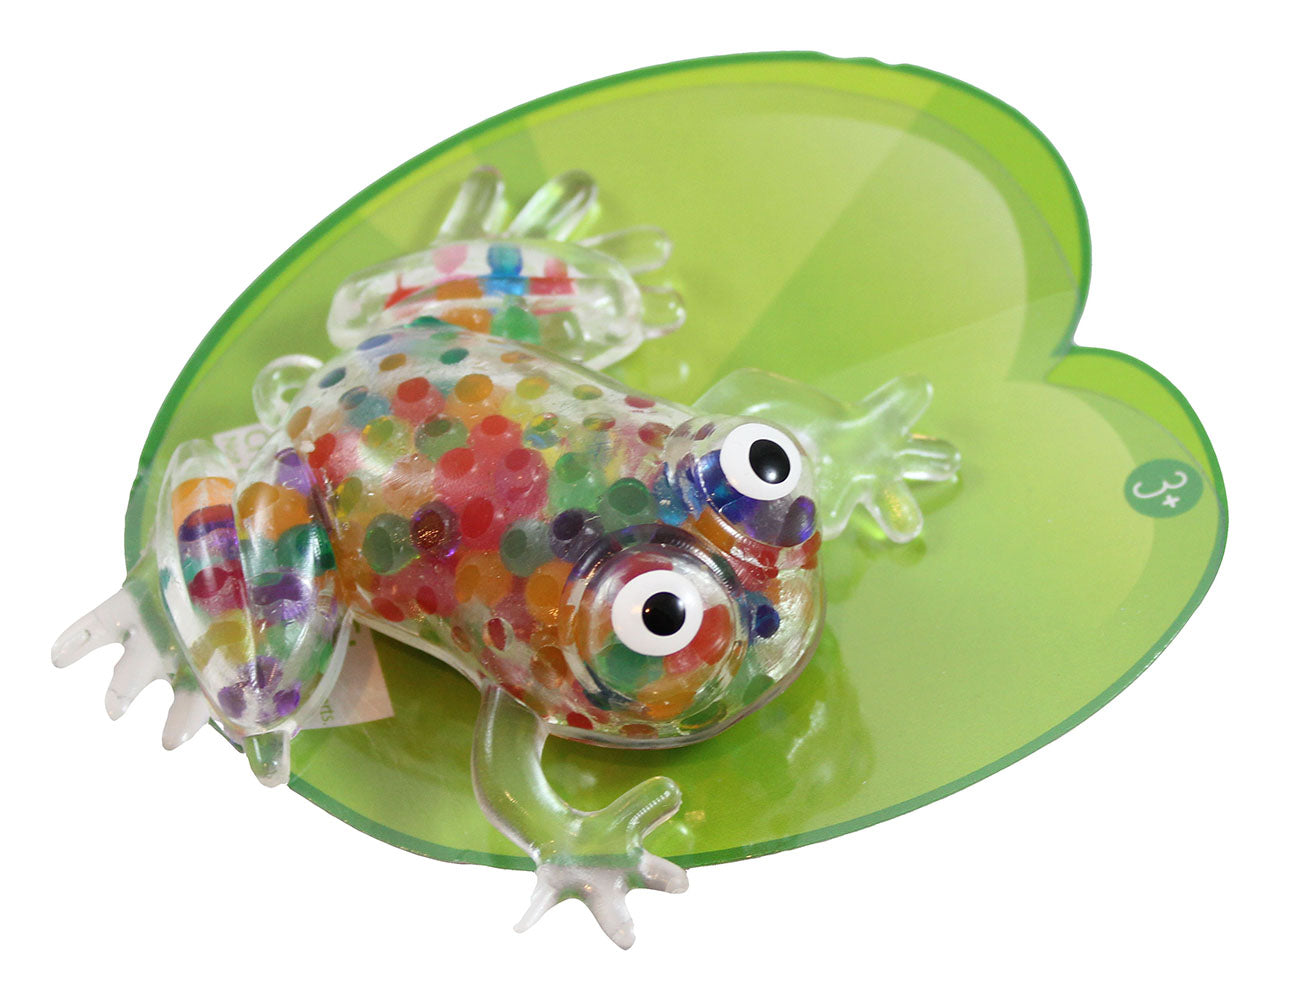 Frog Rainbow Water Bead Filled Squeeze Stress Ball - Sensory, Stress